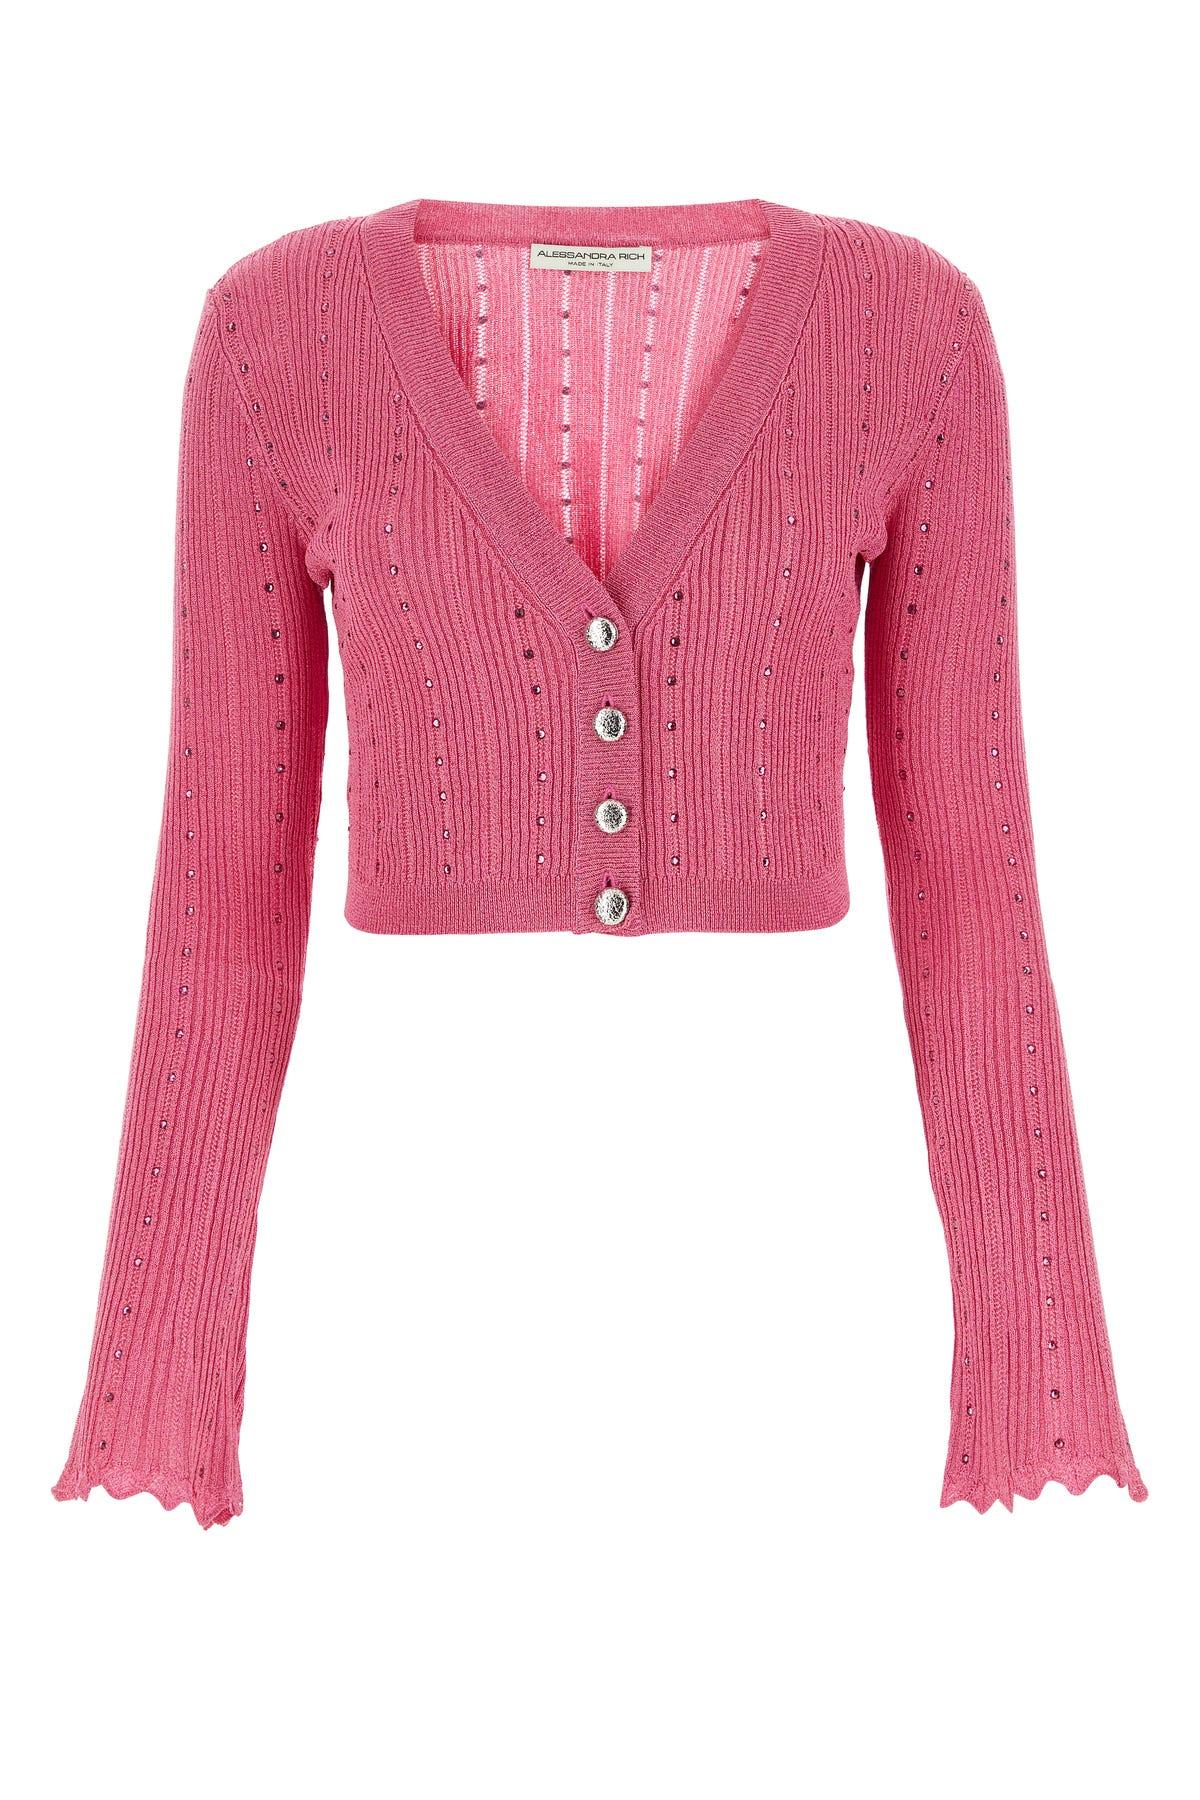 Alessandra Rich Maglieria in Pink | Lyst